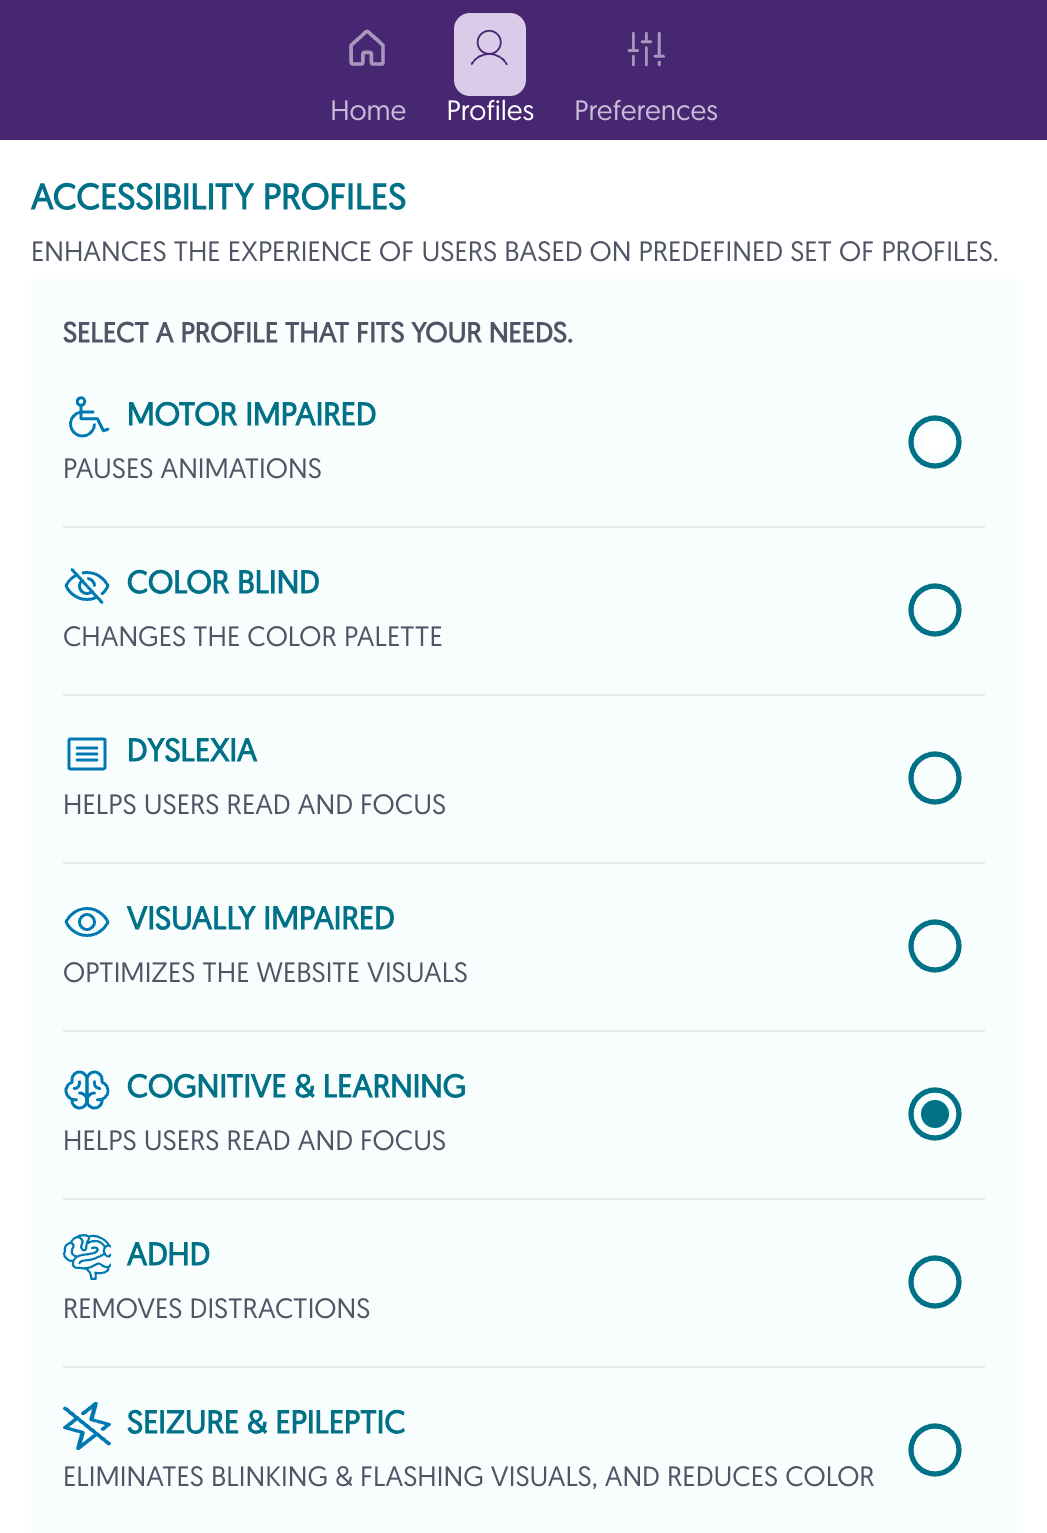 Pop-up of cognitive profile options.